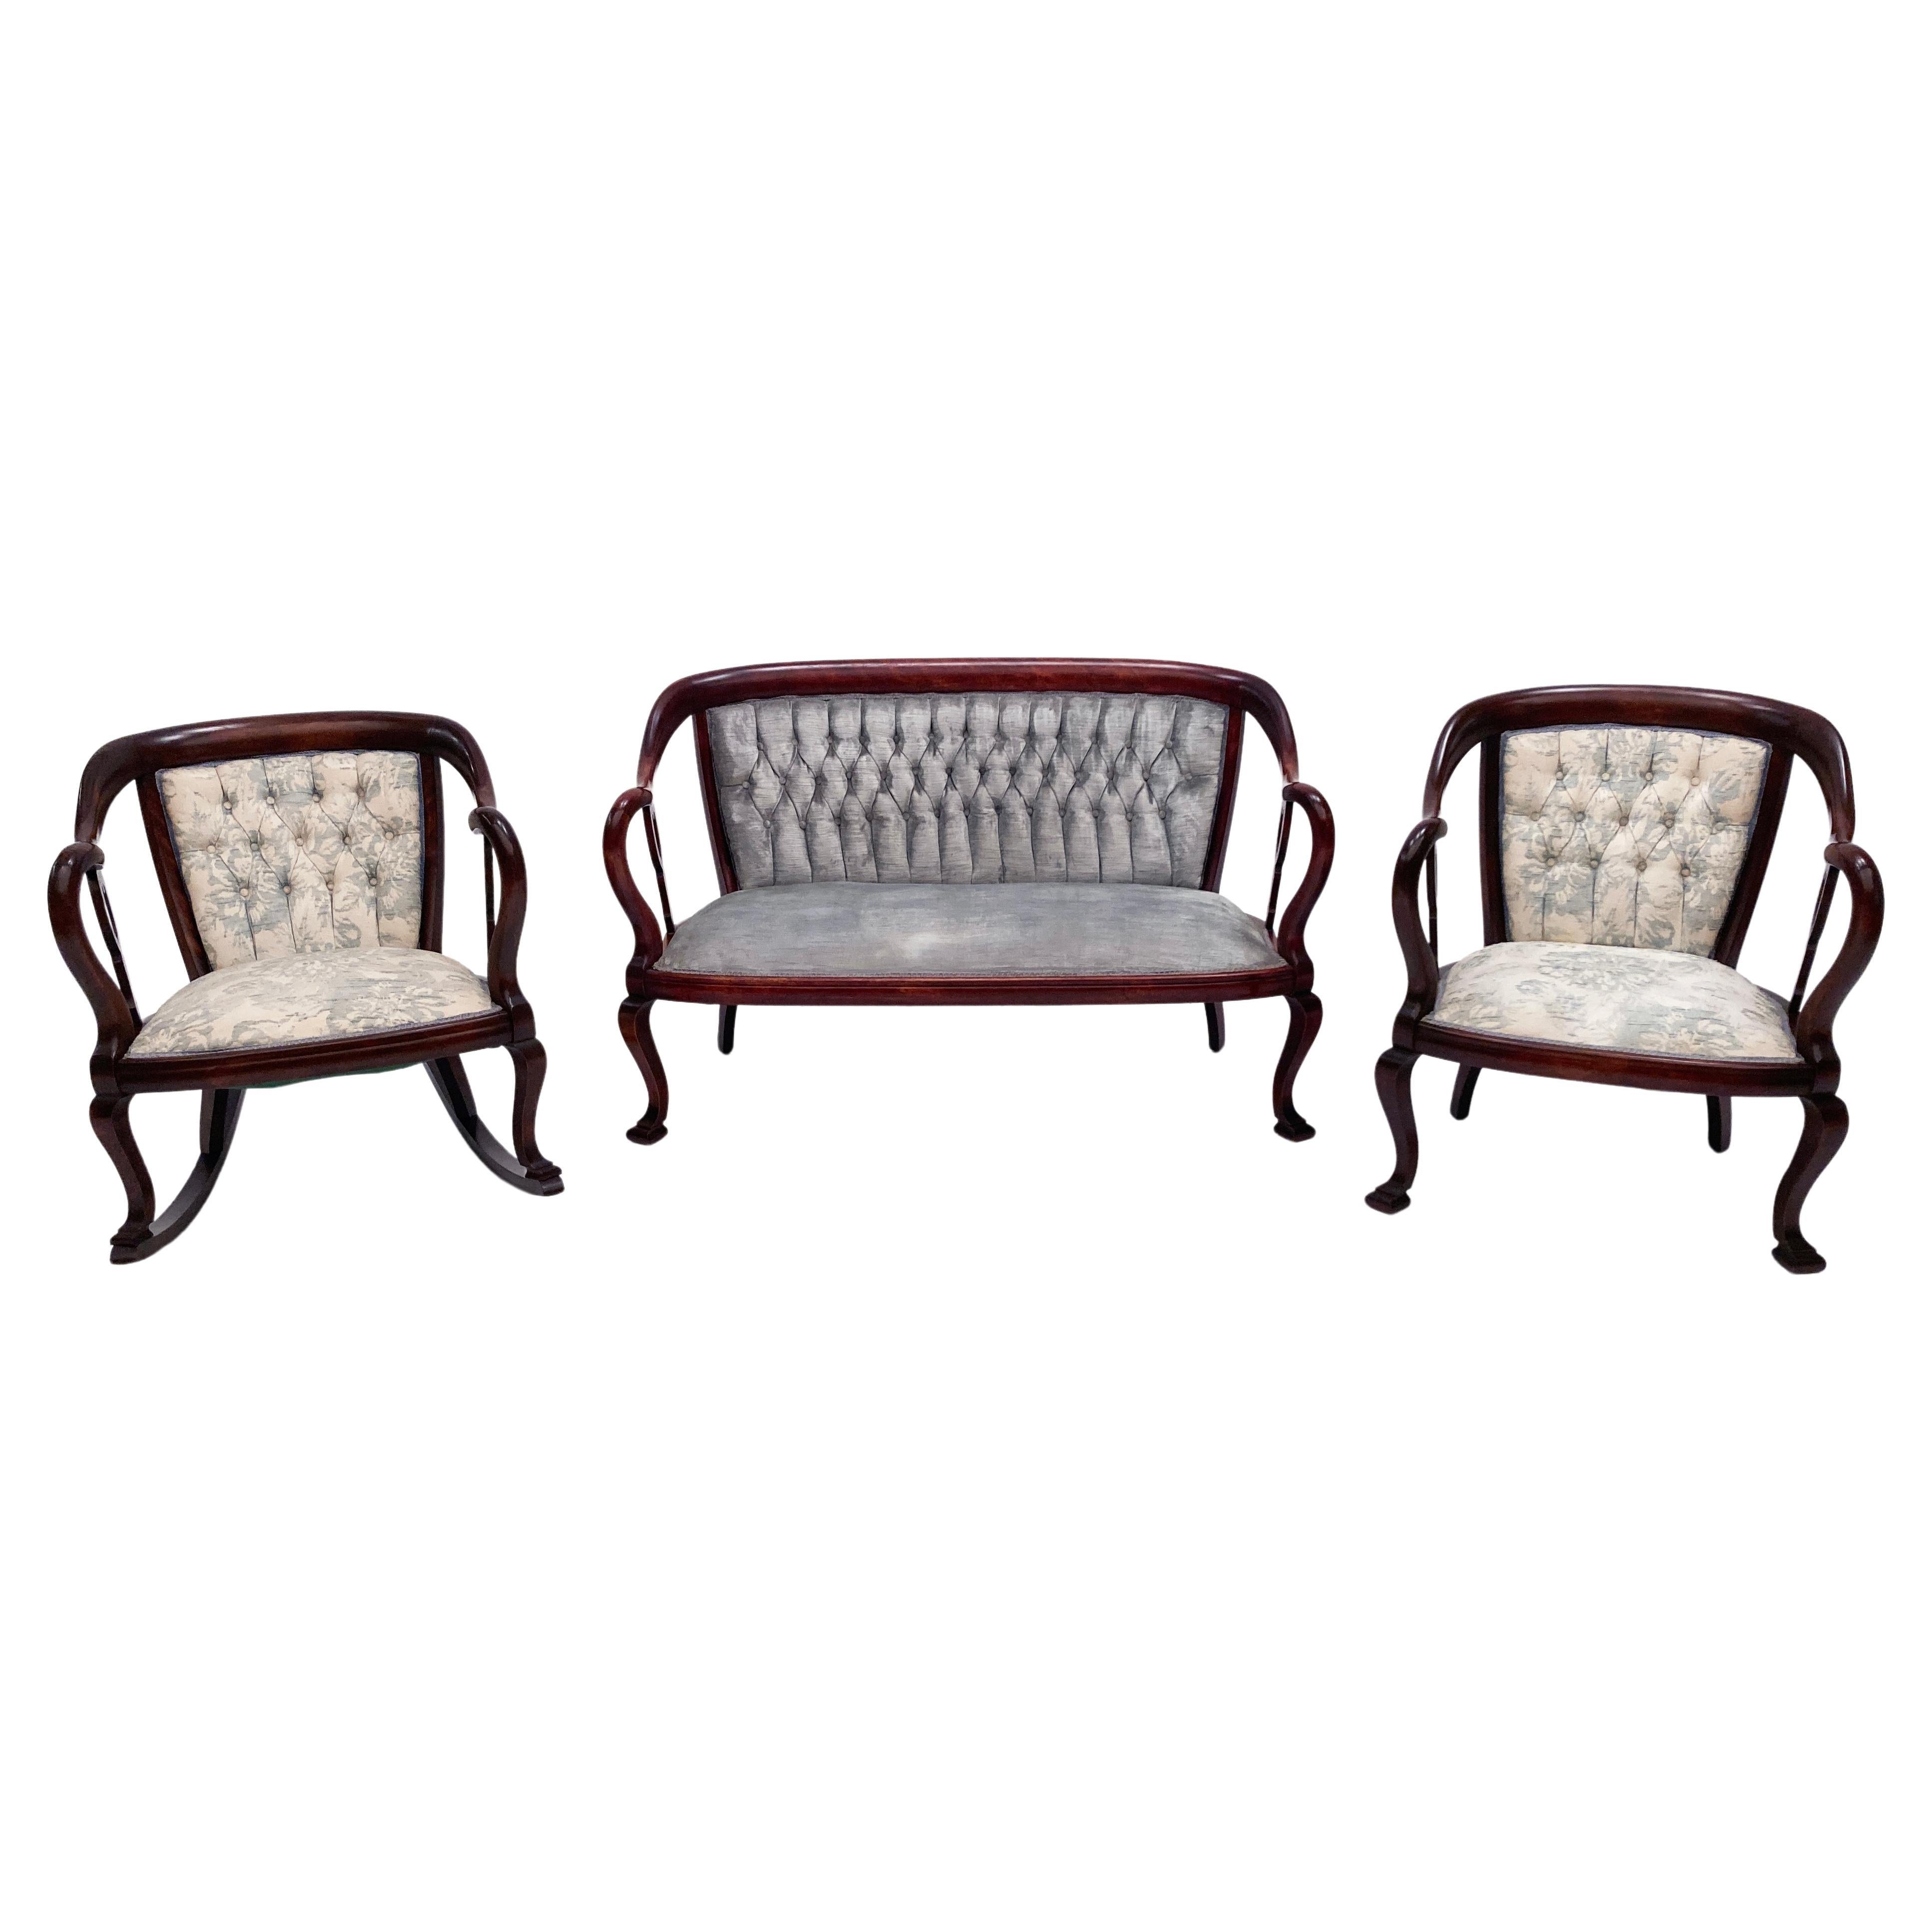 19th Century English Mahogany Settee, Chair and Rocker - Set of Three  For Sale